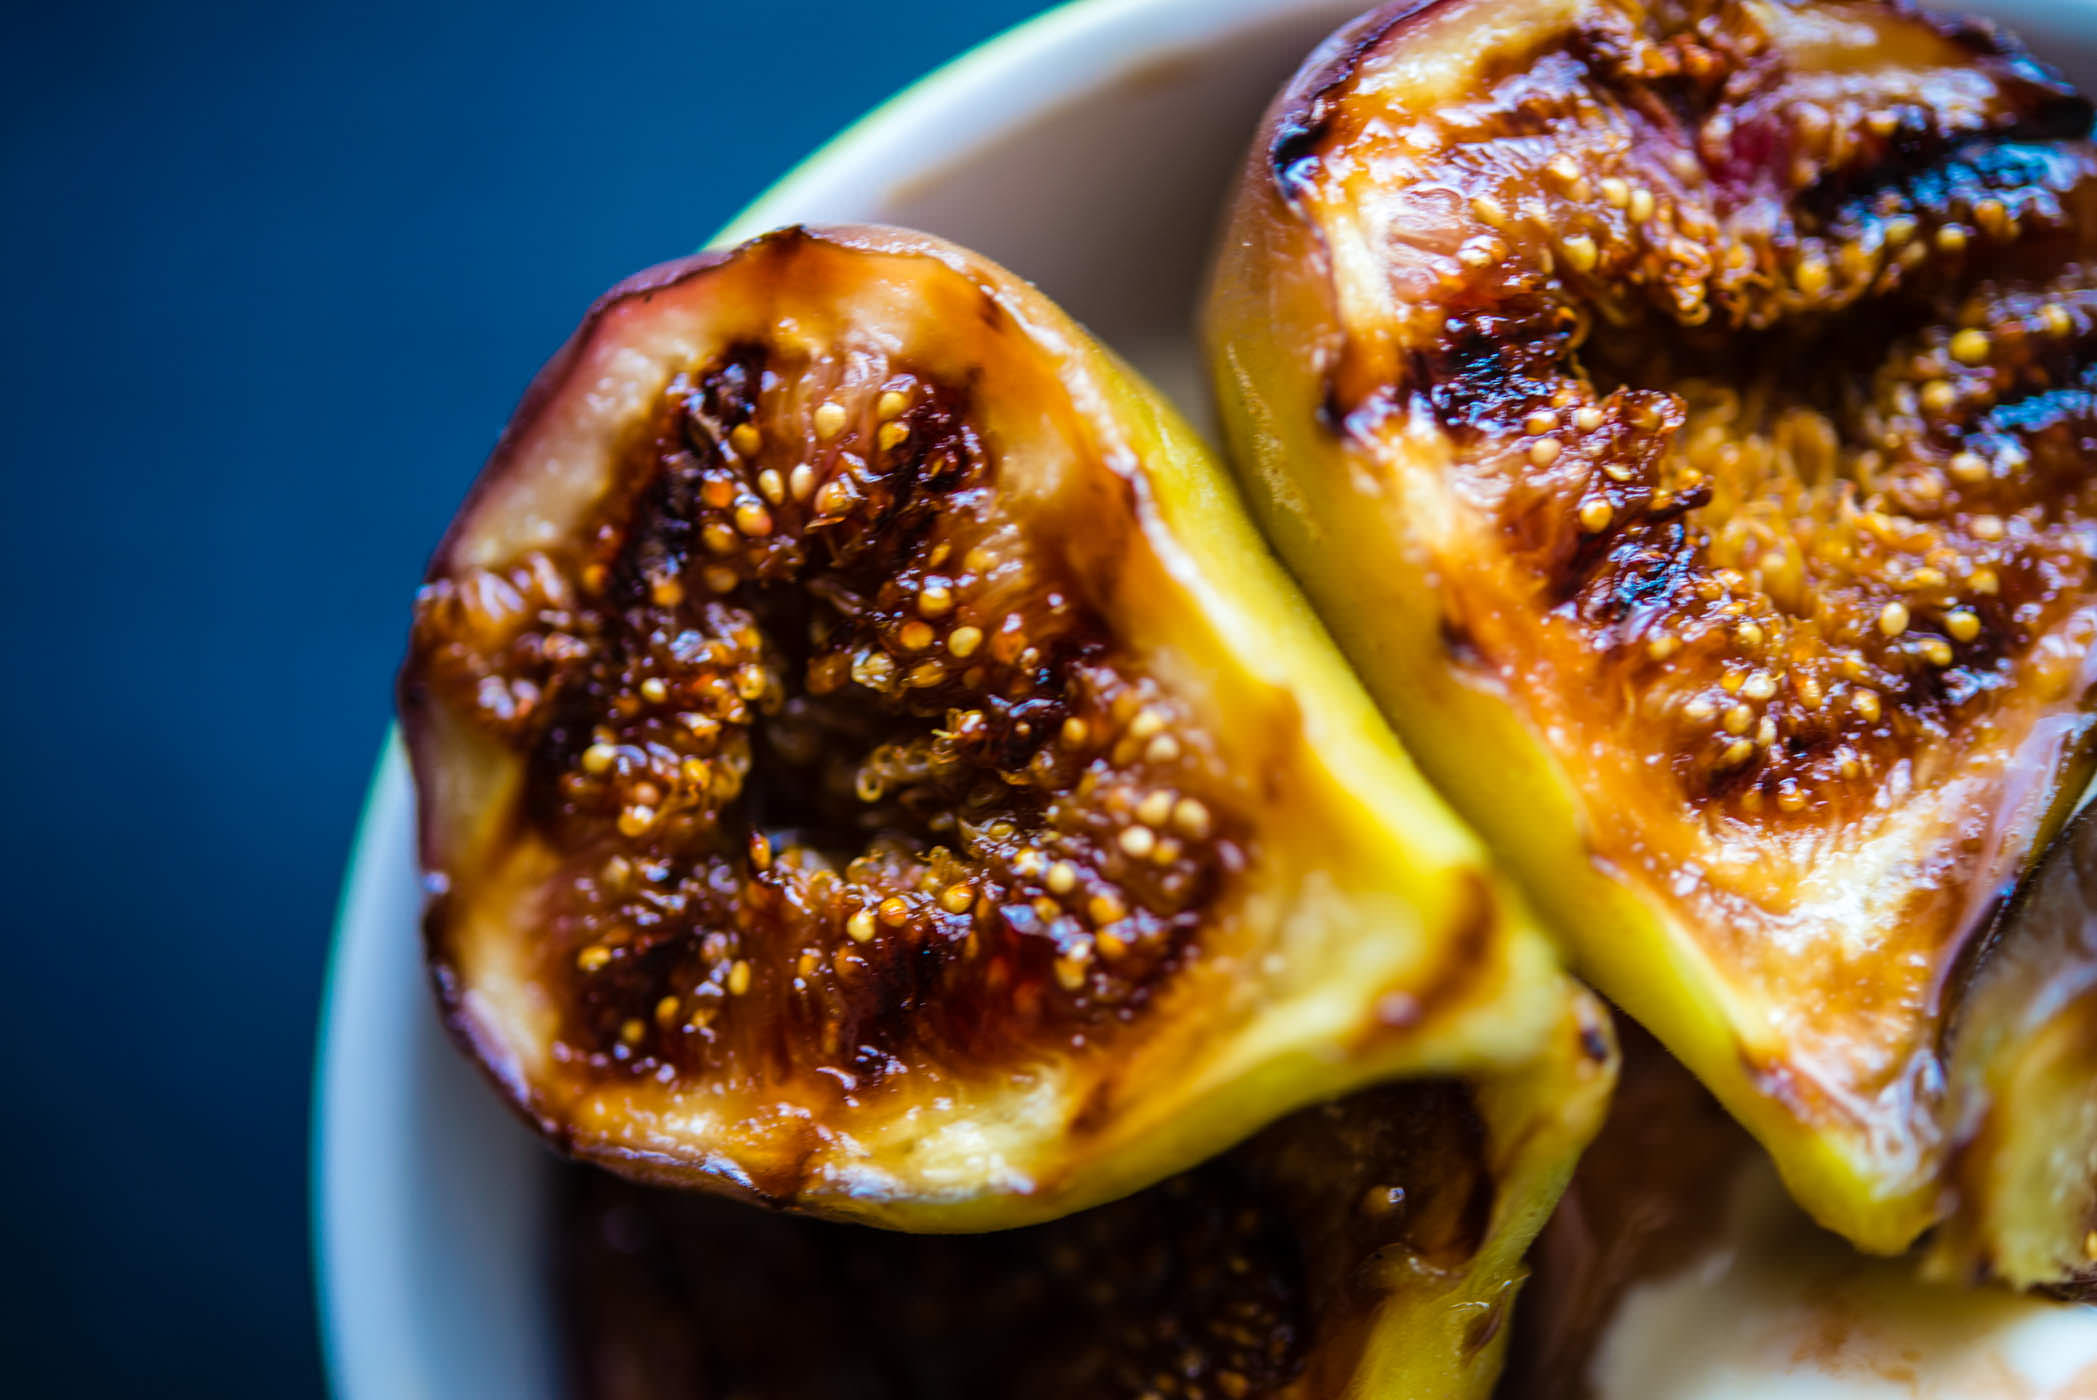 Grilled Figs